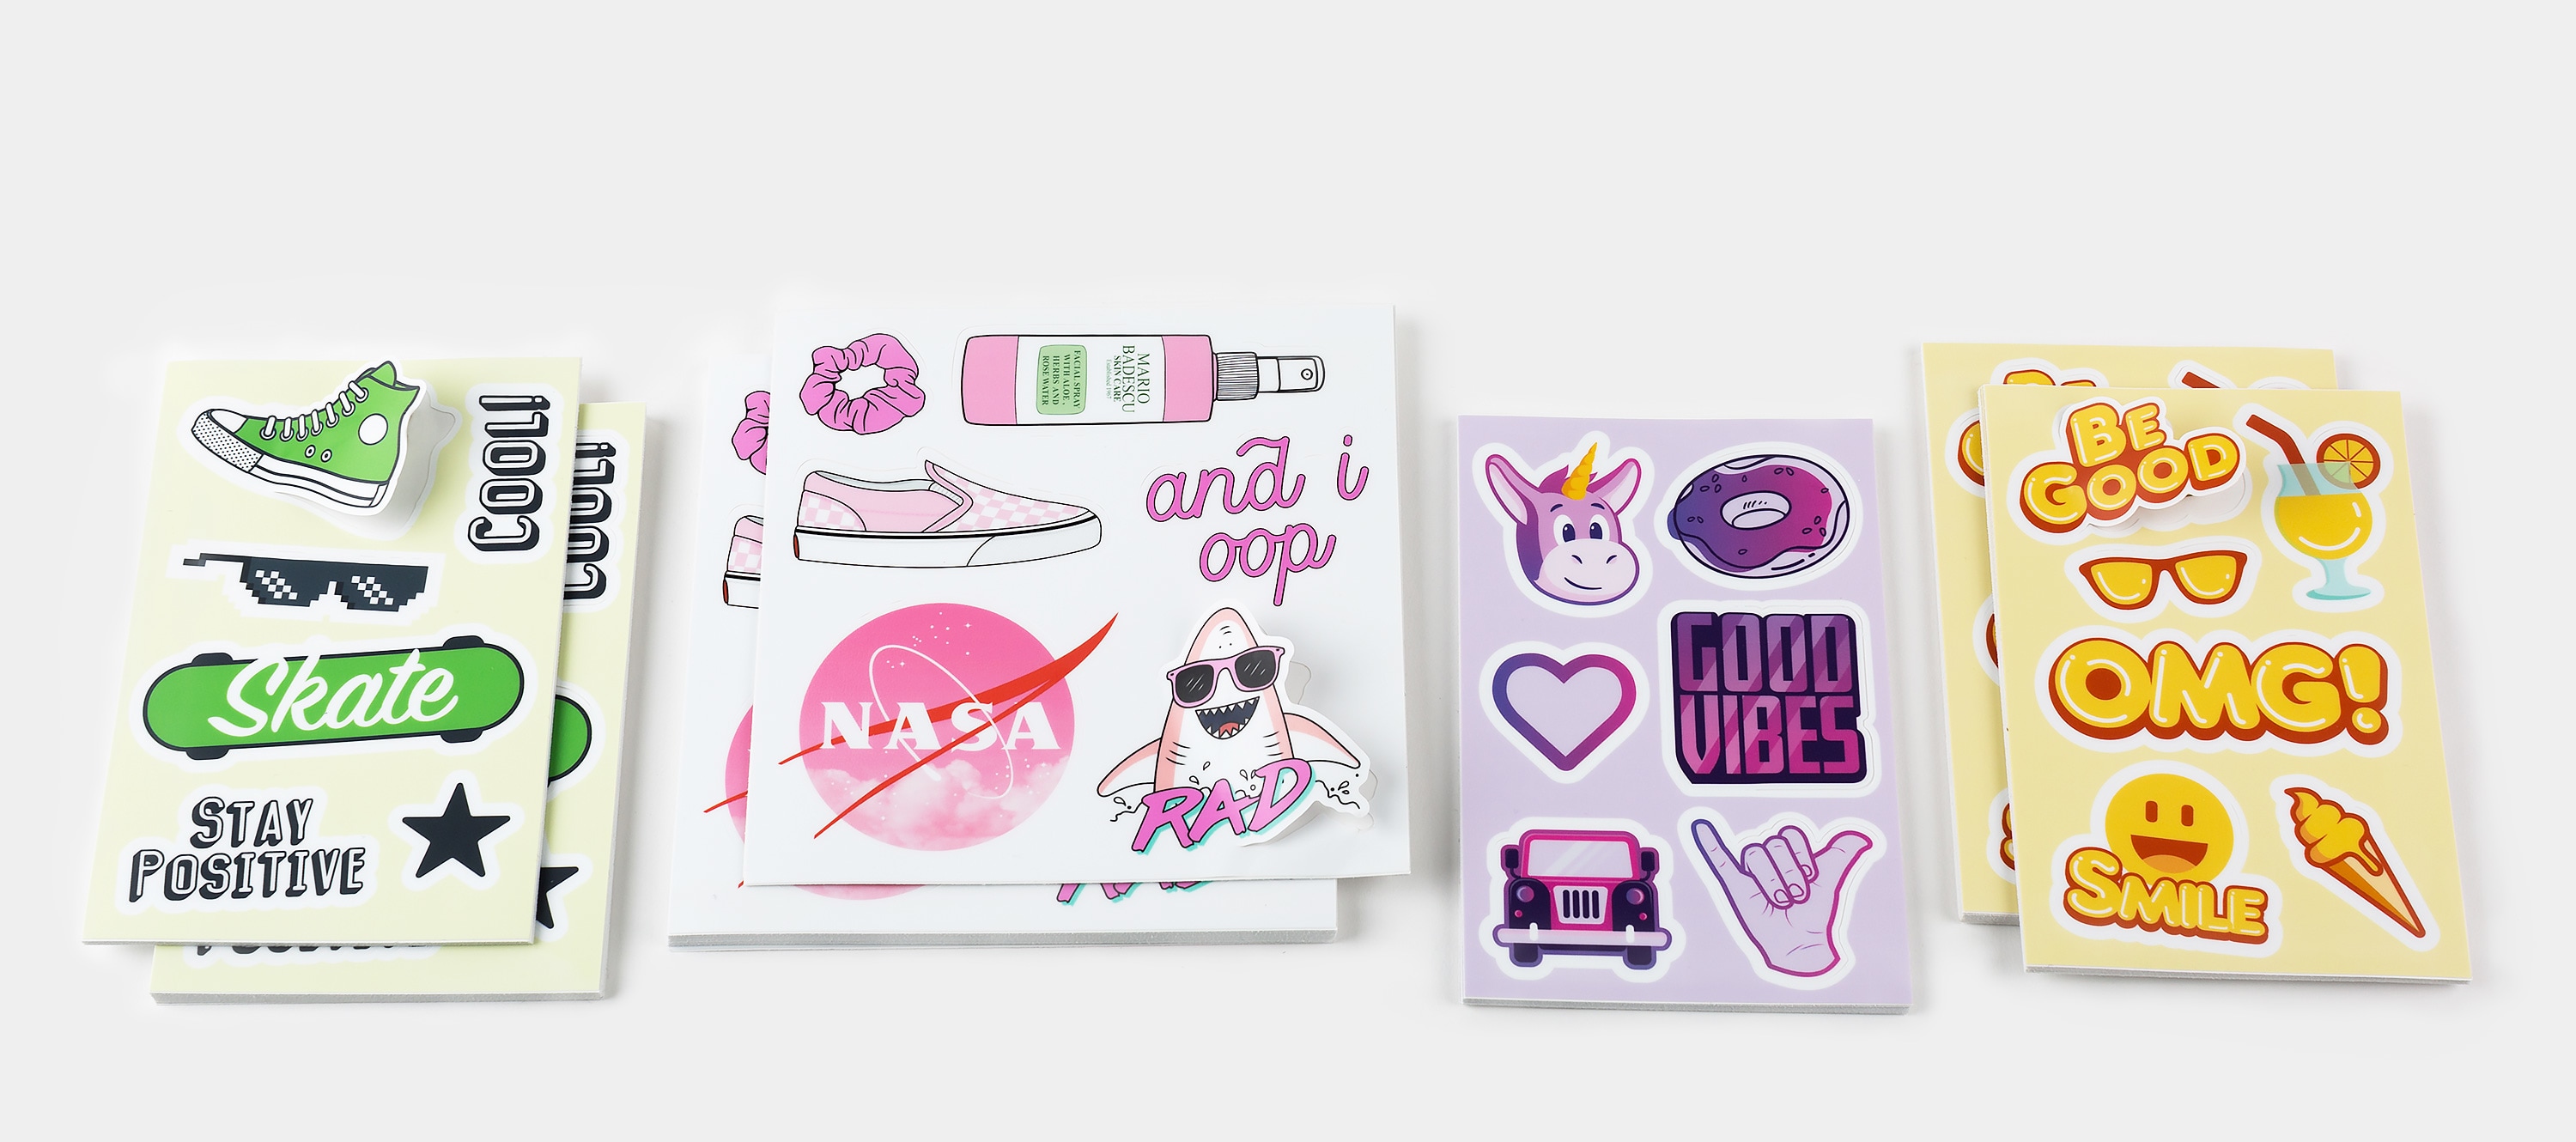 Icons, logos and messages aesthetic stickers